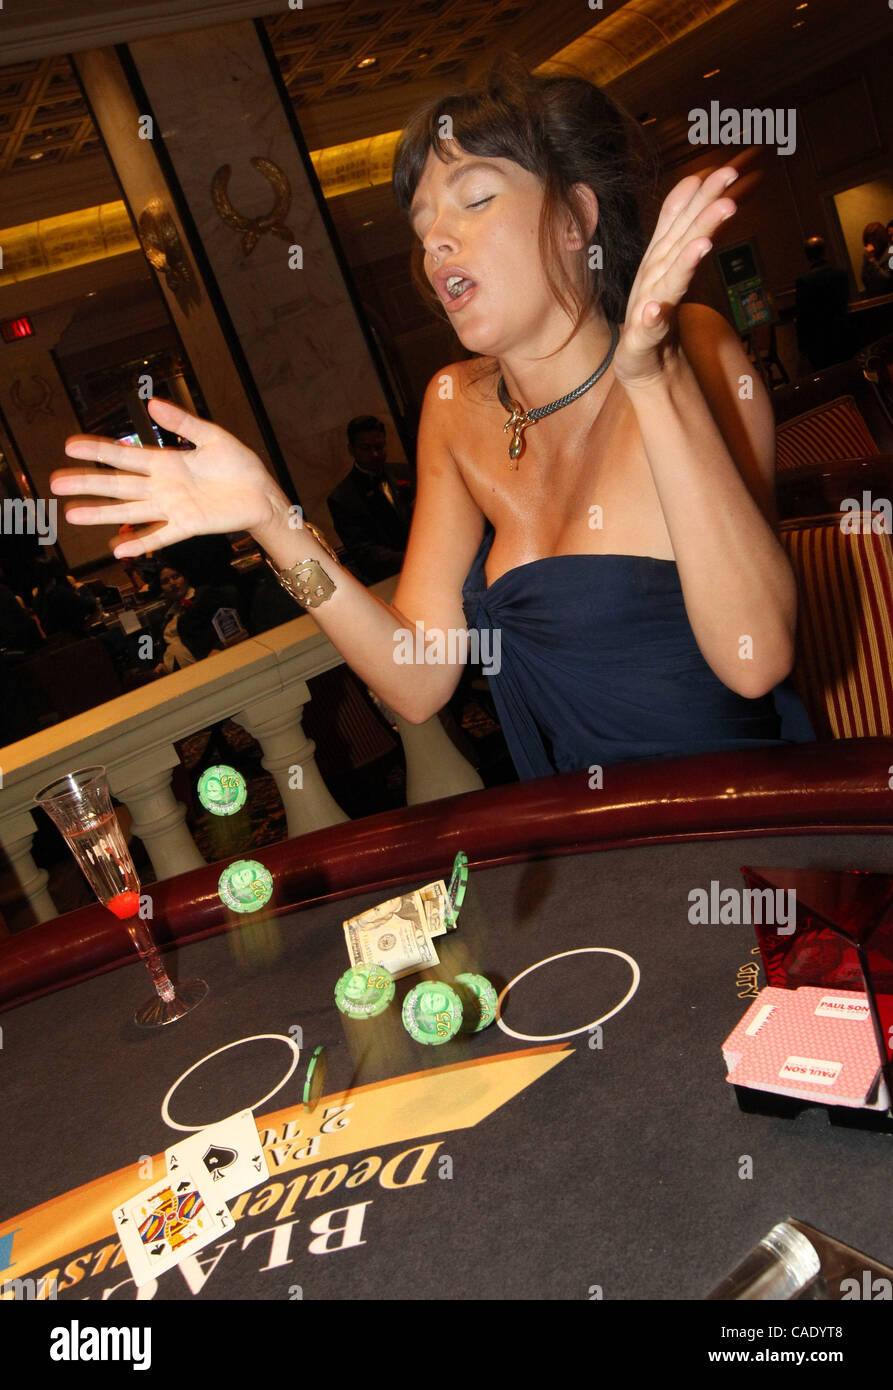 Sep 16, 2010 - Atlantic City, New Jersey, U.S. - PAZ DE LA HUERTA throws her chips in the air on Caesars casino floor high limit tables as they are in town for the HBO & Caesars Premier of  'Boardwalk Empire'  (Credit Image: © Tom Briglia/ZUMApress.com) Stock Photo